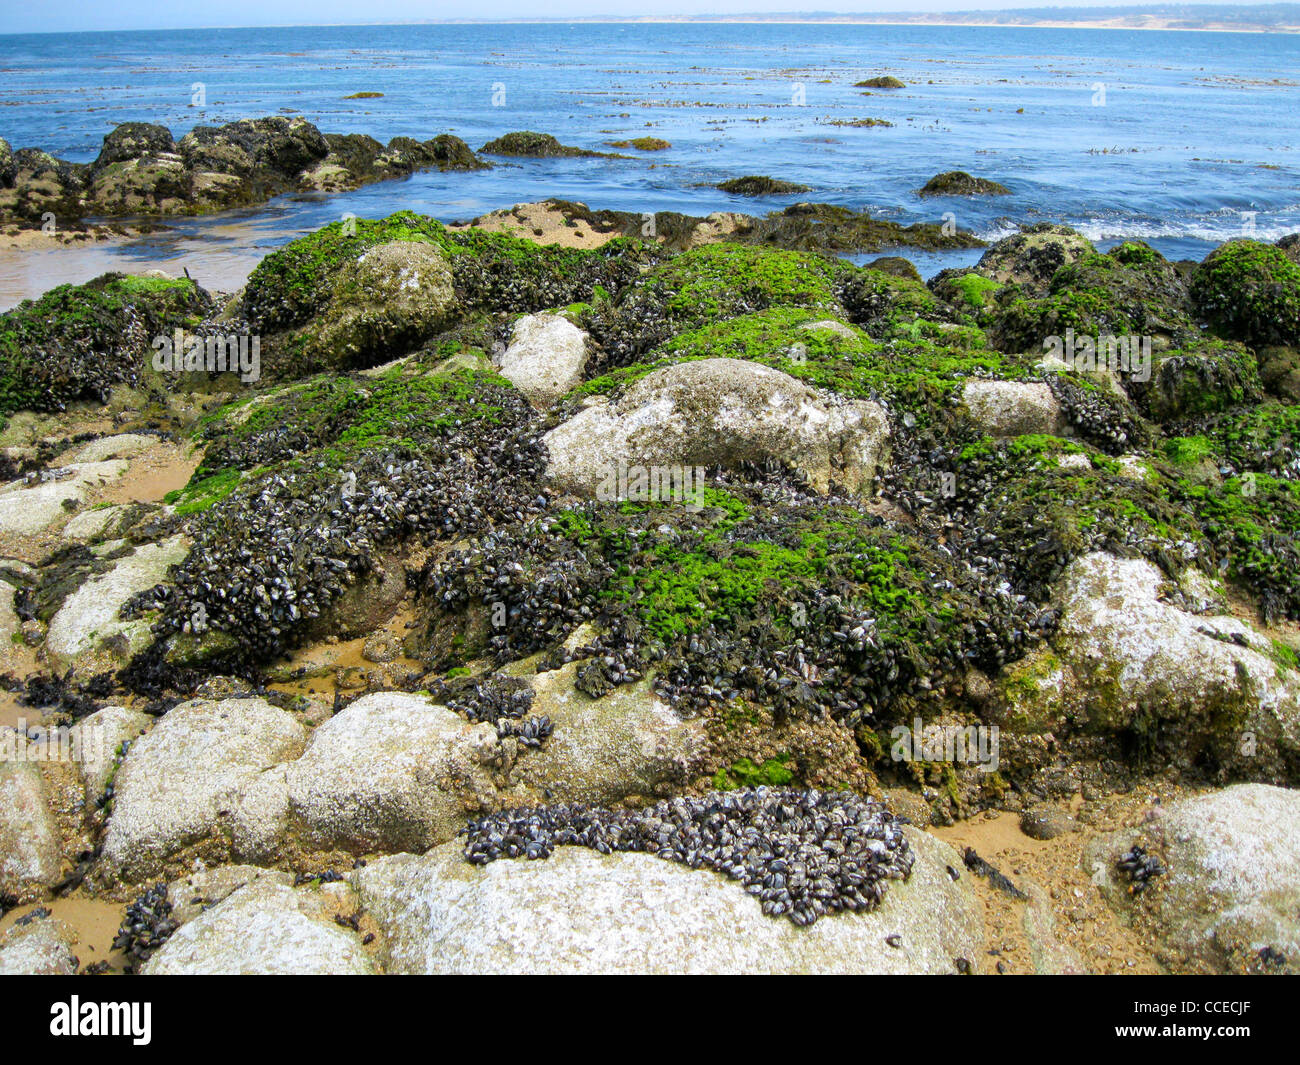 A large mussel habitat at the Pacific coast Stock Photo